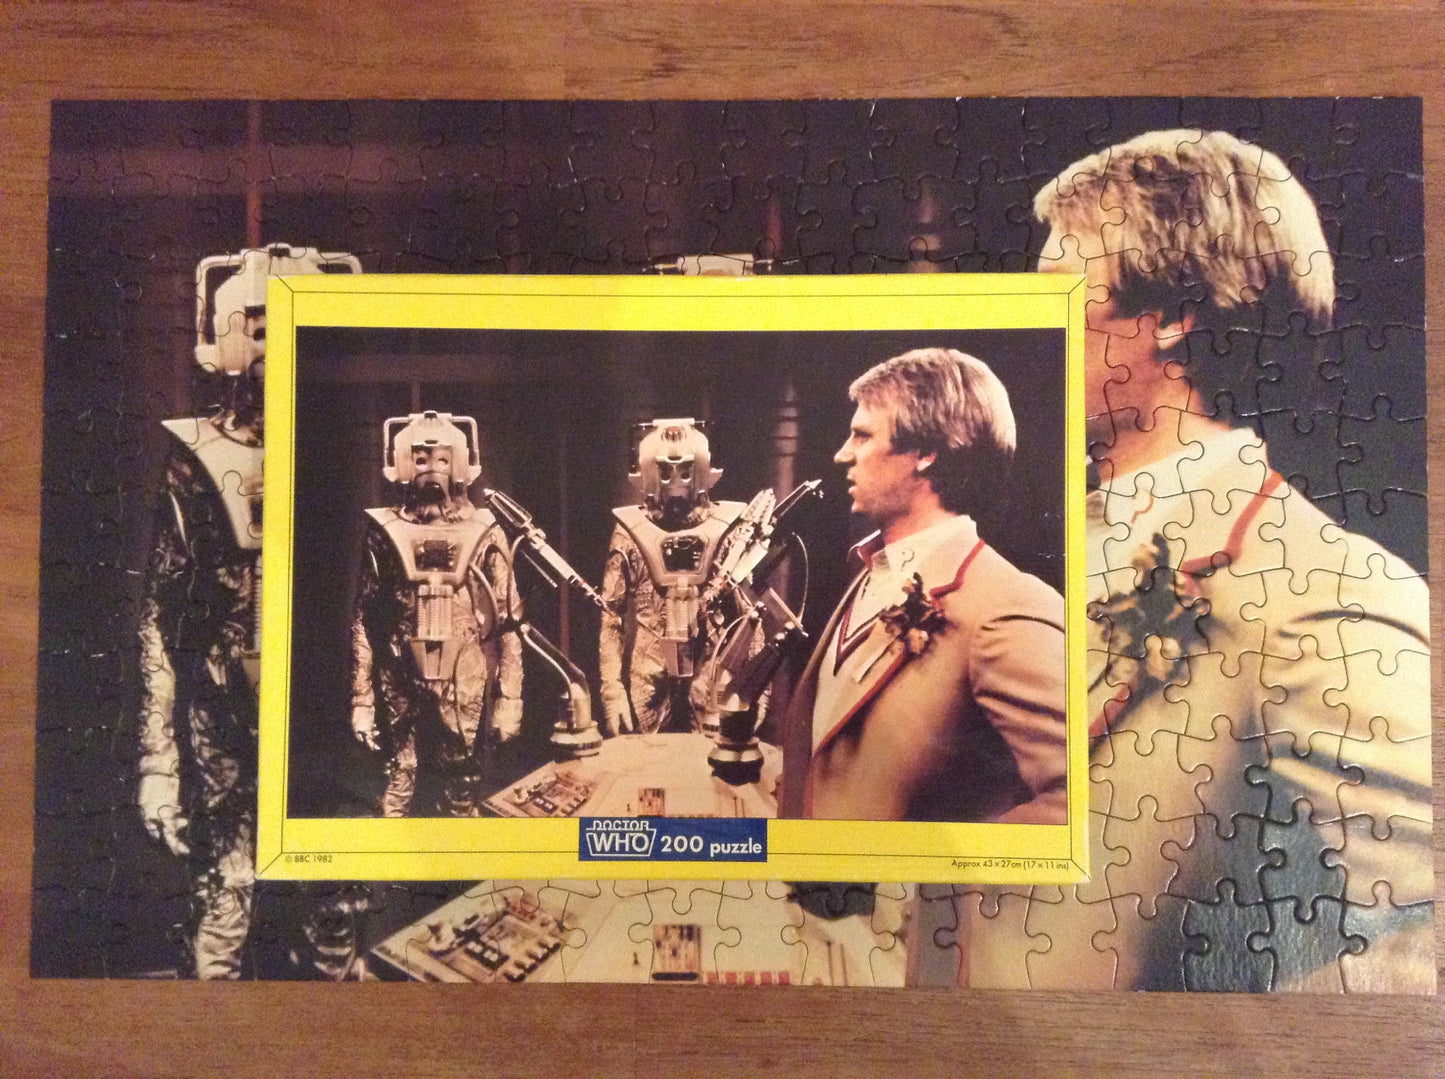 Doctor Who Vintage 1982 Waddingtons 200 Piece Fully Interlocking Jigsaw Puzzle Featuring Peter Davison And The Cybermen